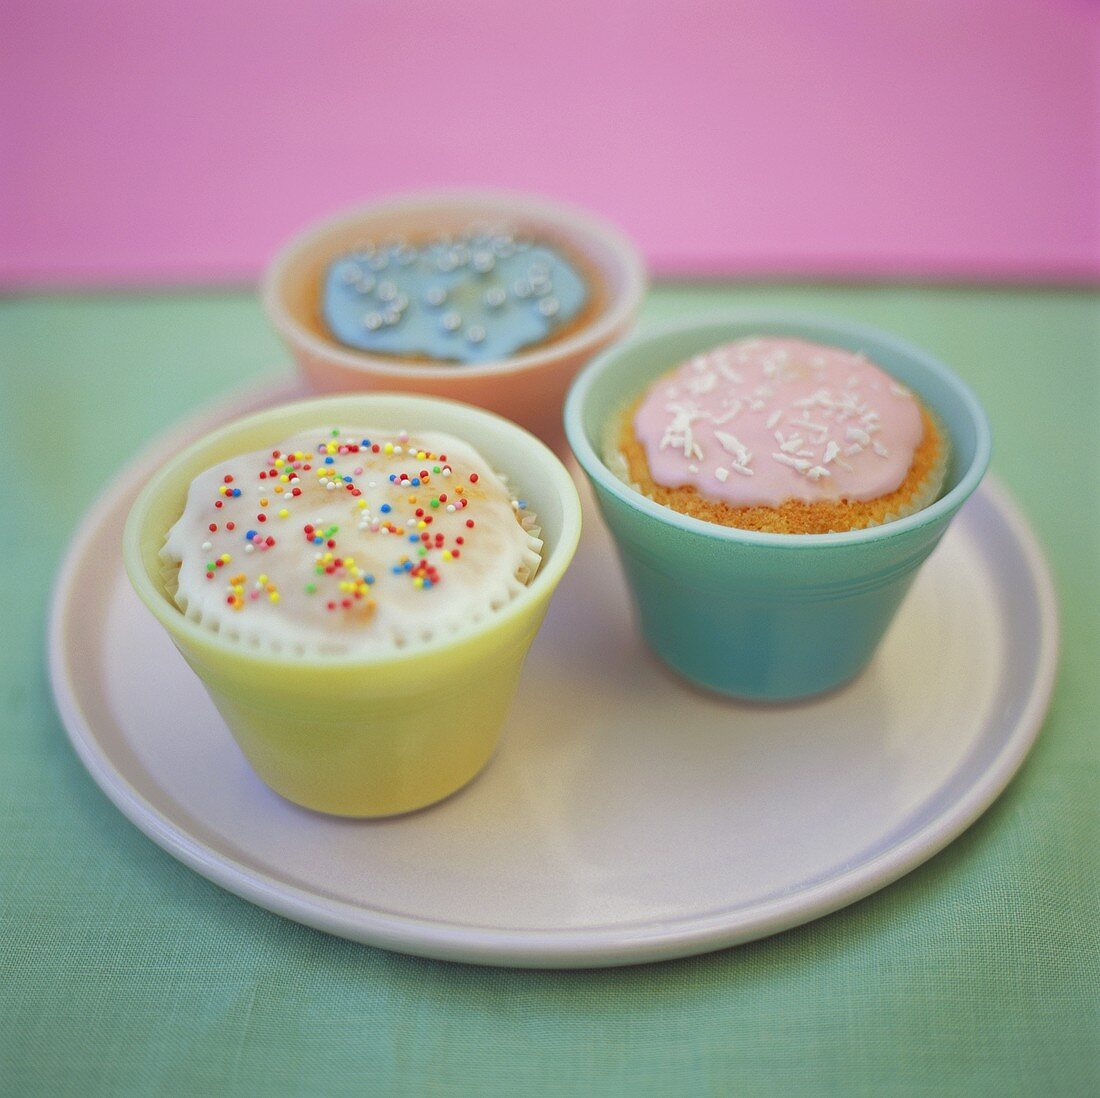 Cupcakes with pastel-coloured icing